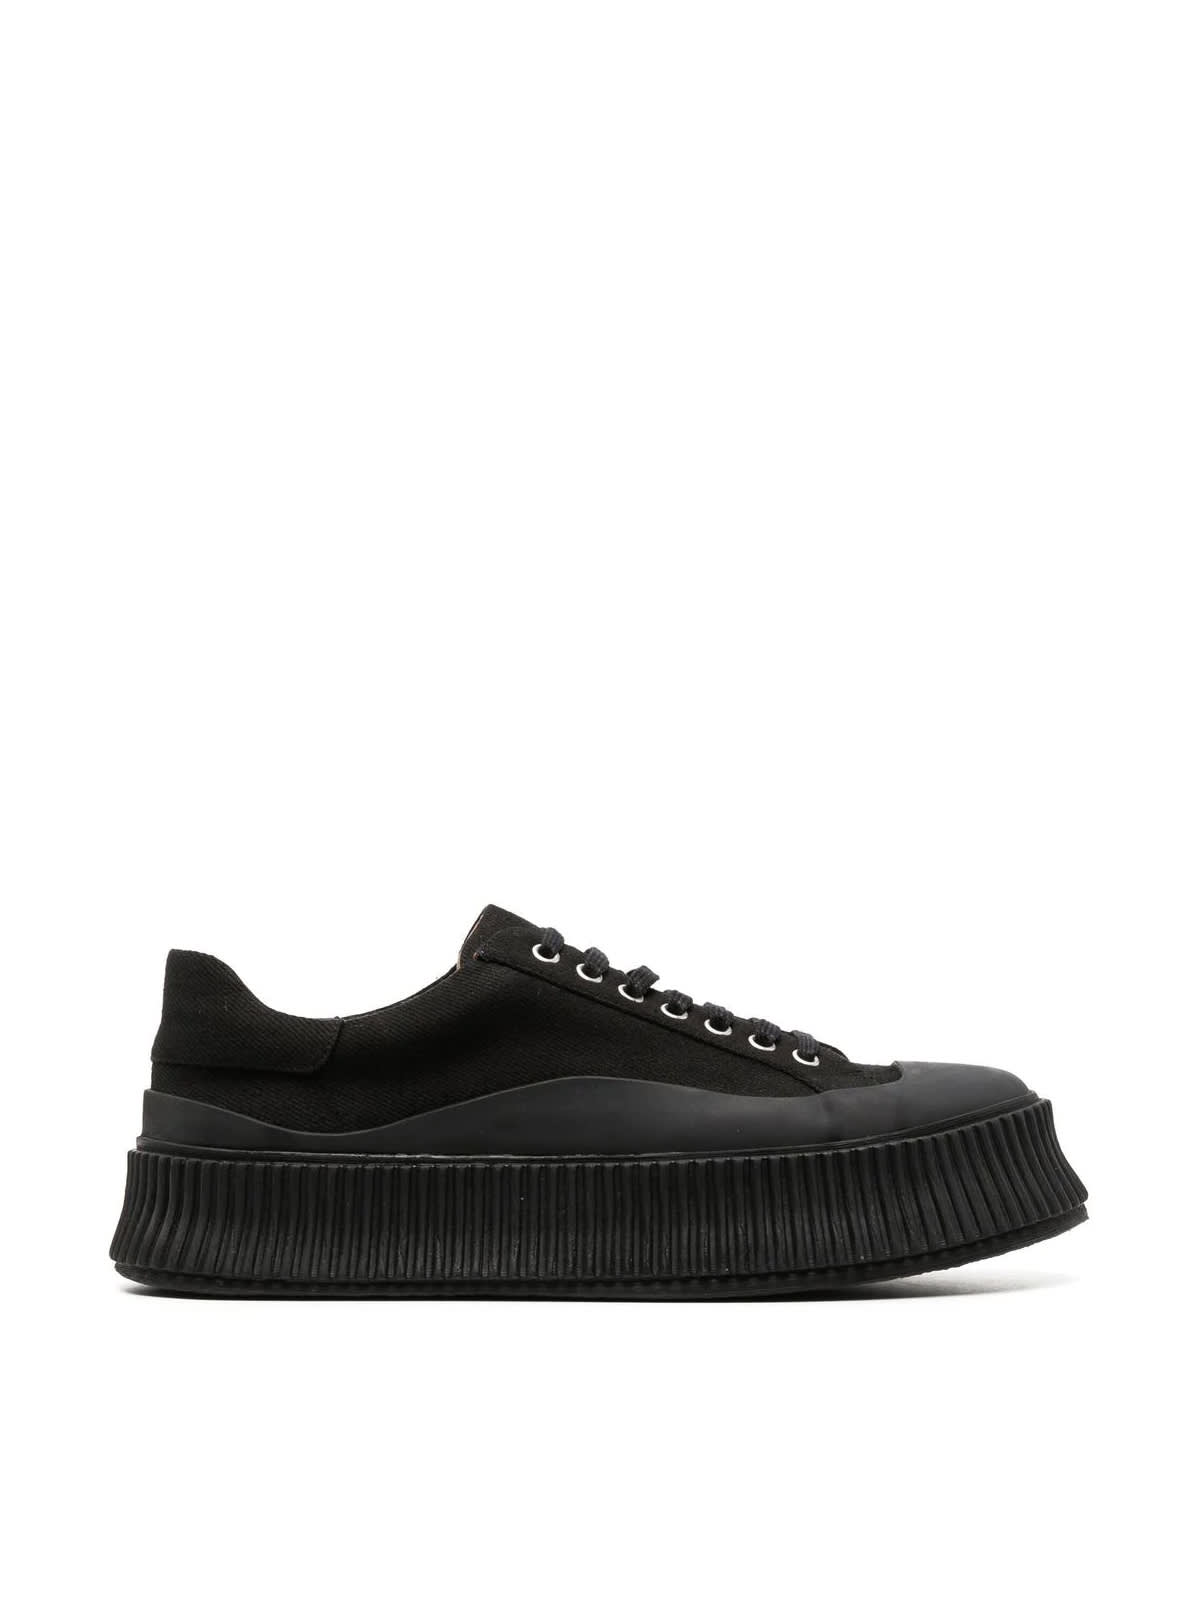 Jil Sander Low Laced Sneakers With Vulcanized Rubber Sole